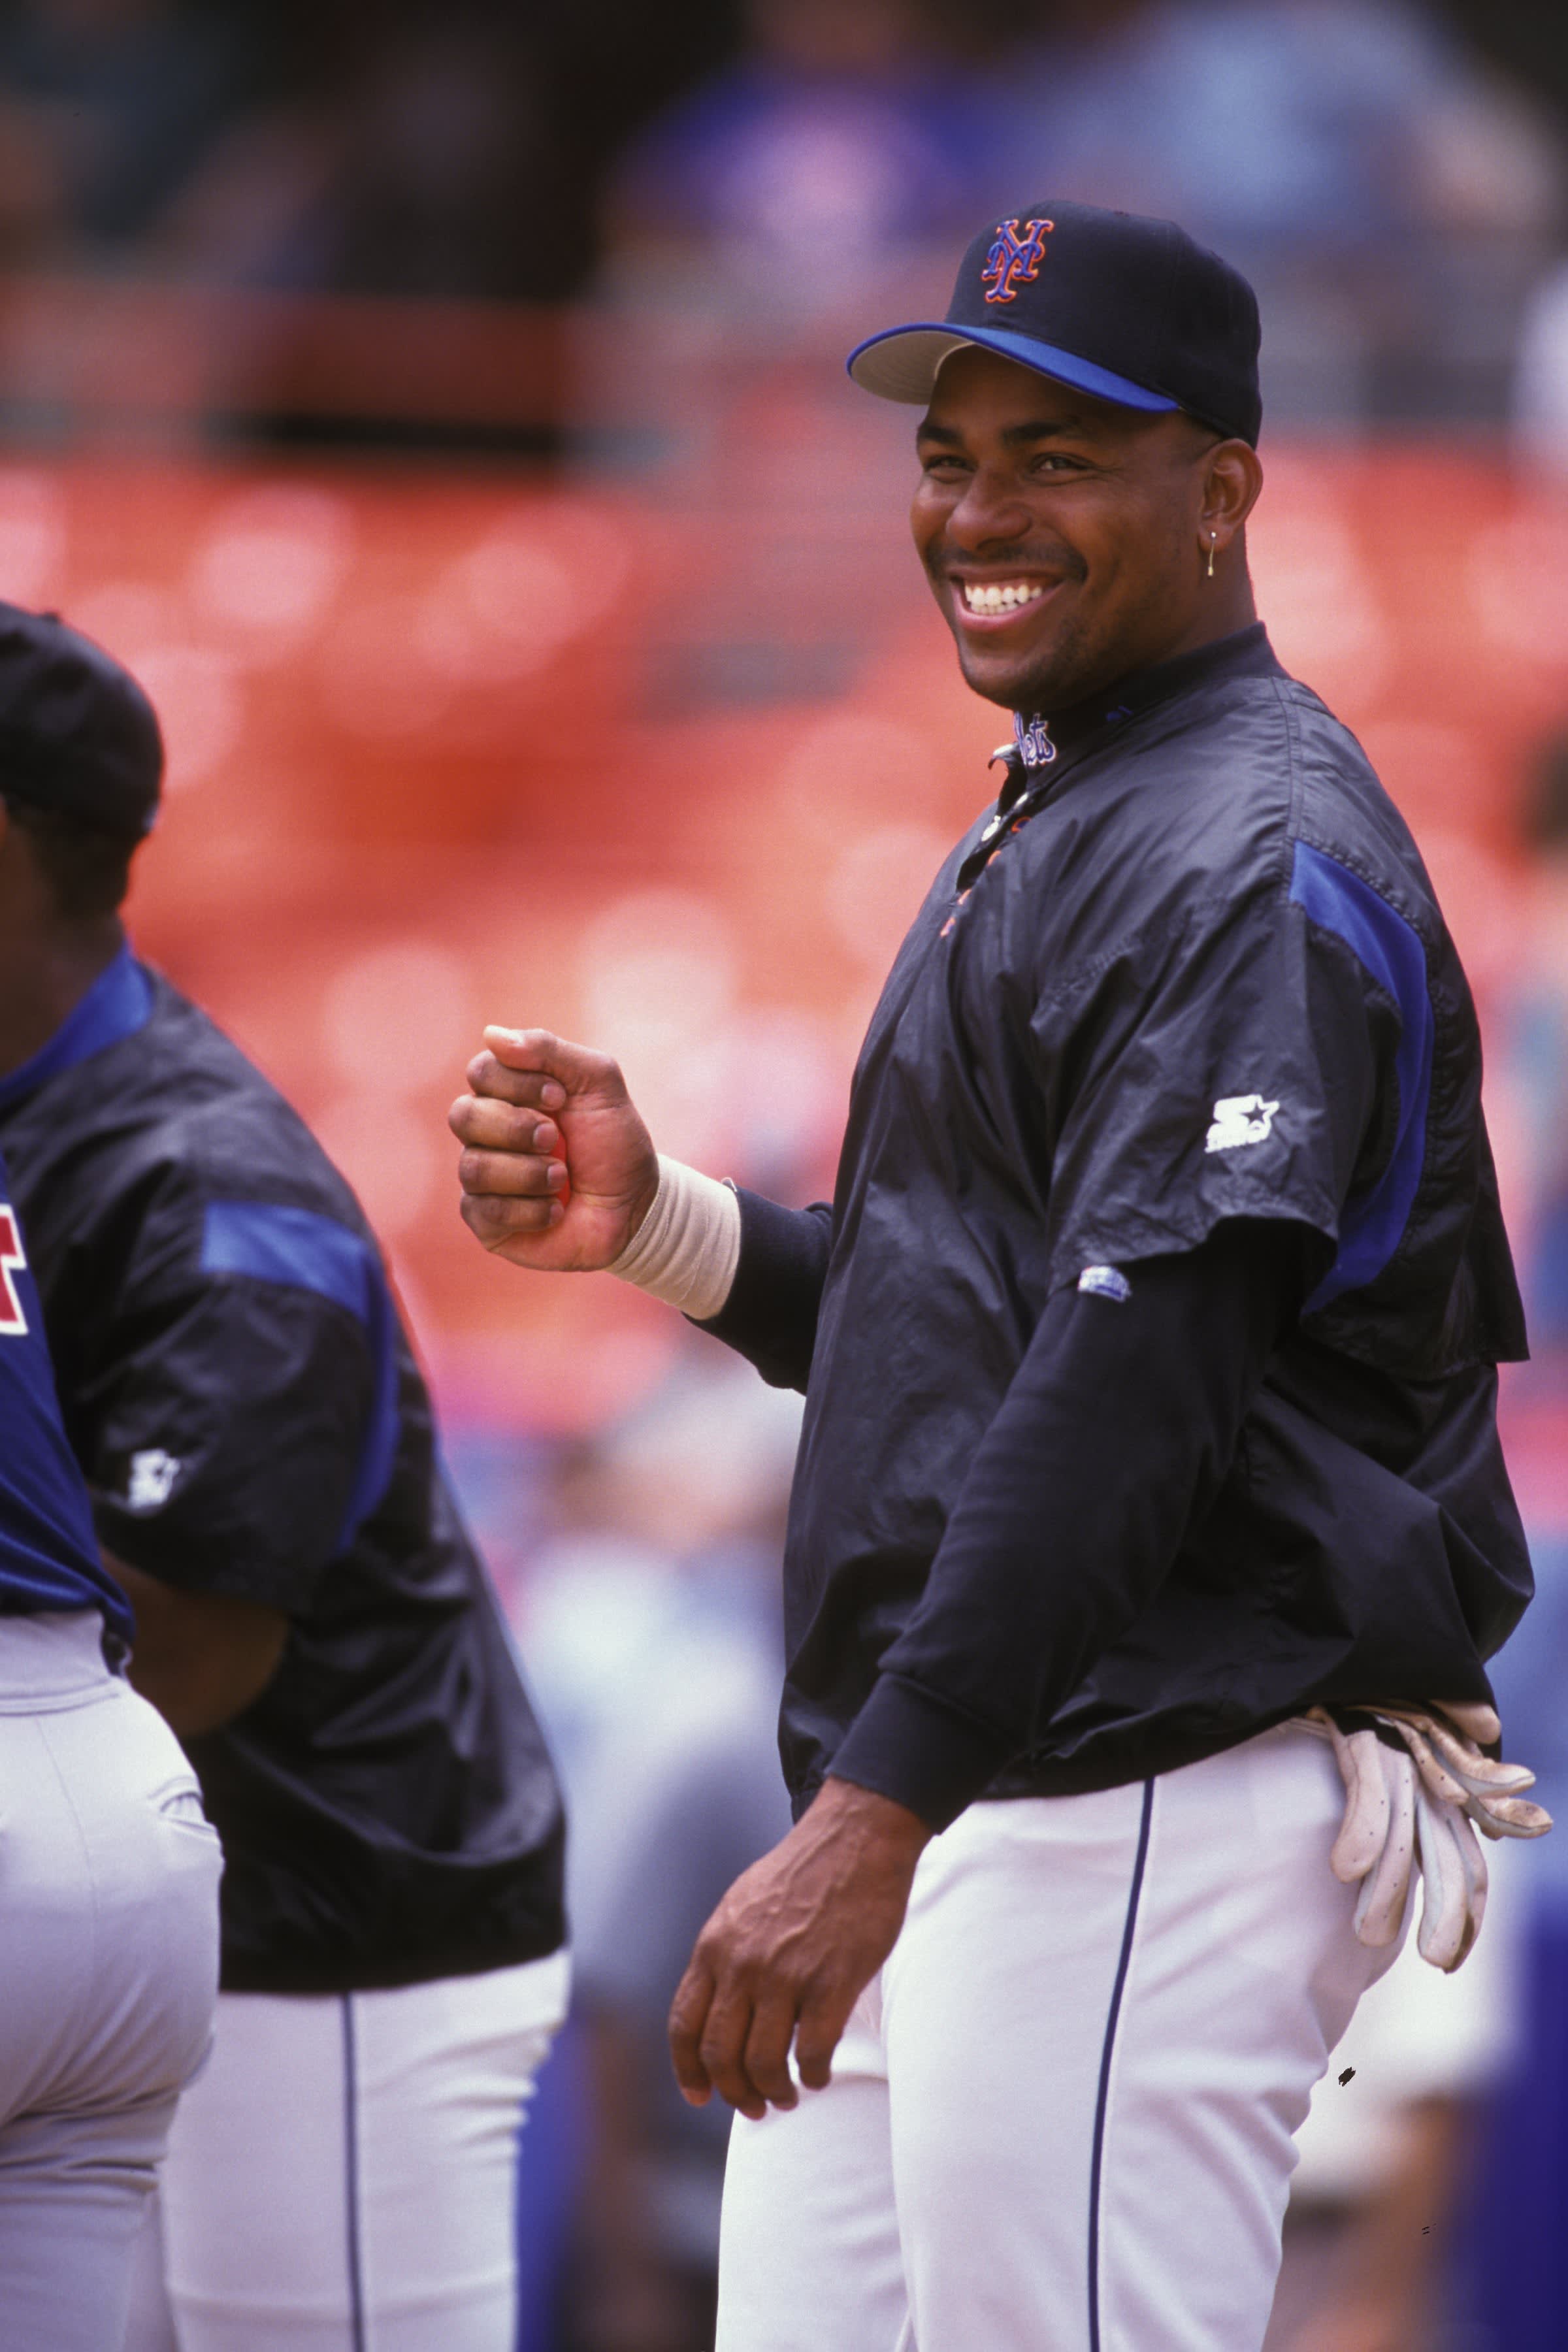 Bobby Bonilla Was More Than The Patron Saint Of Bad Contracts